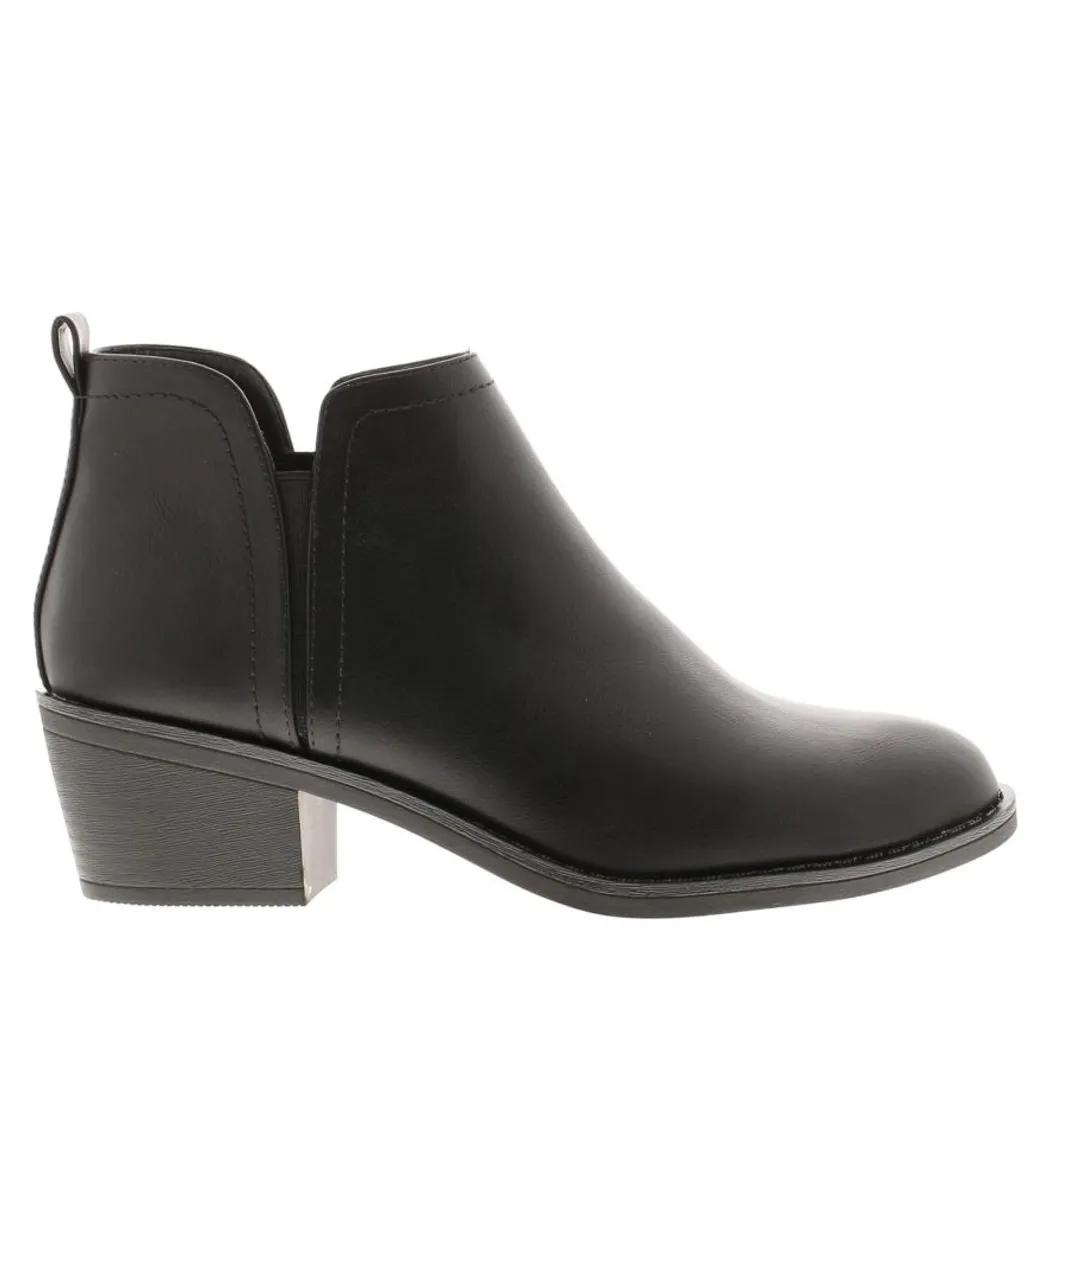 Rocket Dog Womenss York Ankle Boots in Black